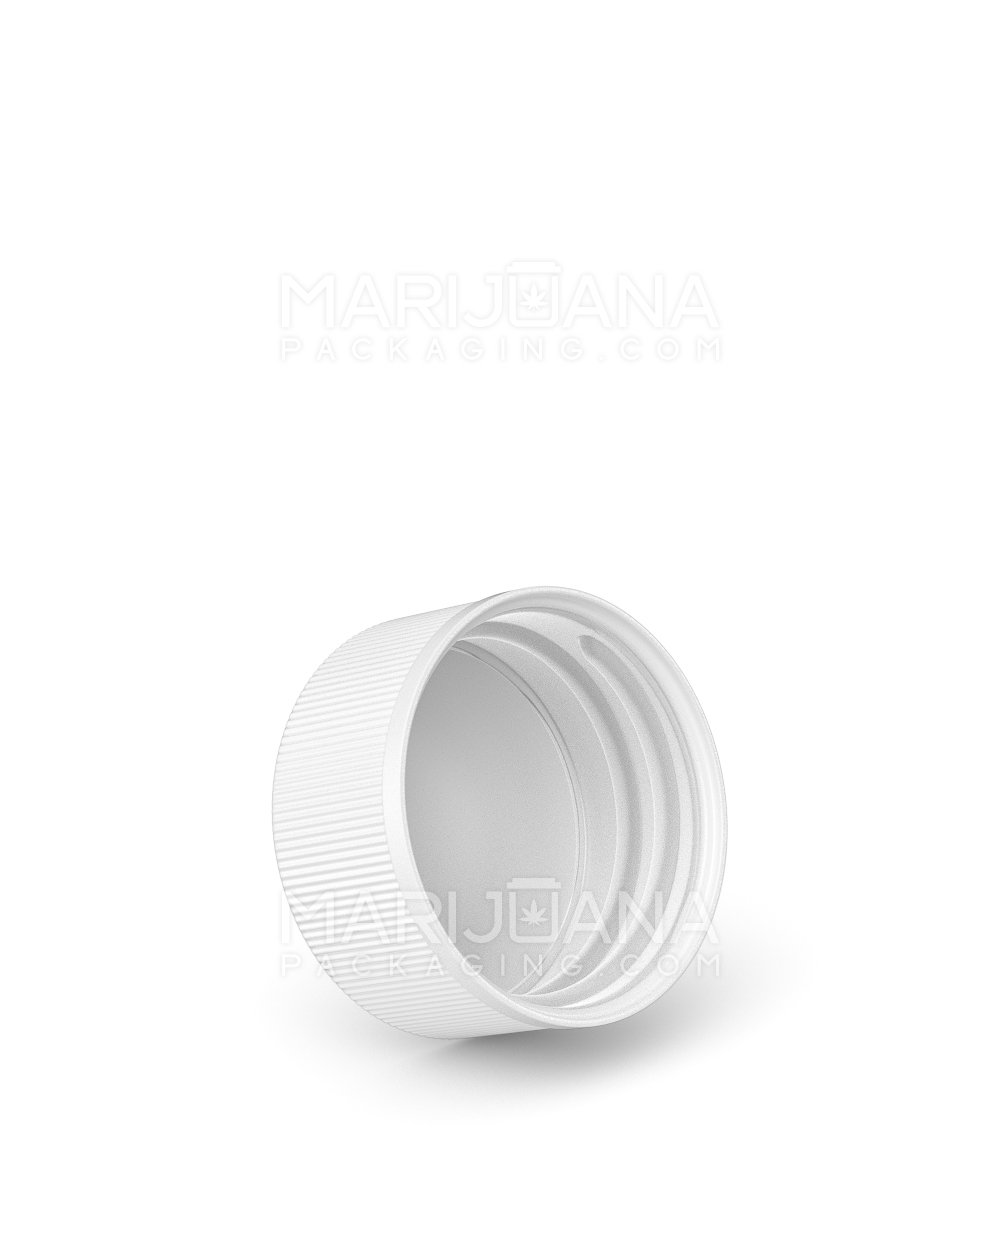 Child Resistant | Ribbed Push Down & Turn Plastic Caps w/ Text & Foam Liner | 28mm - Semi Gloss White - 504 Count - 2